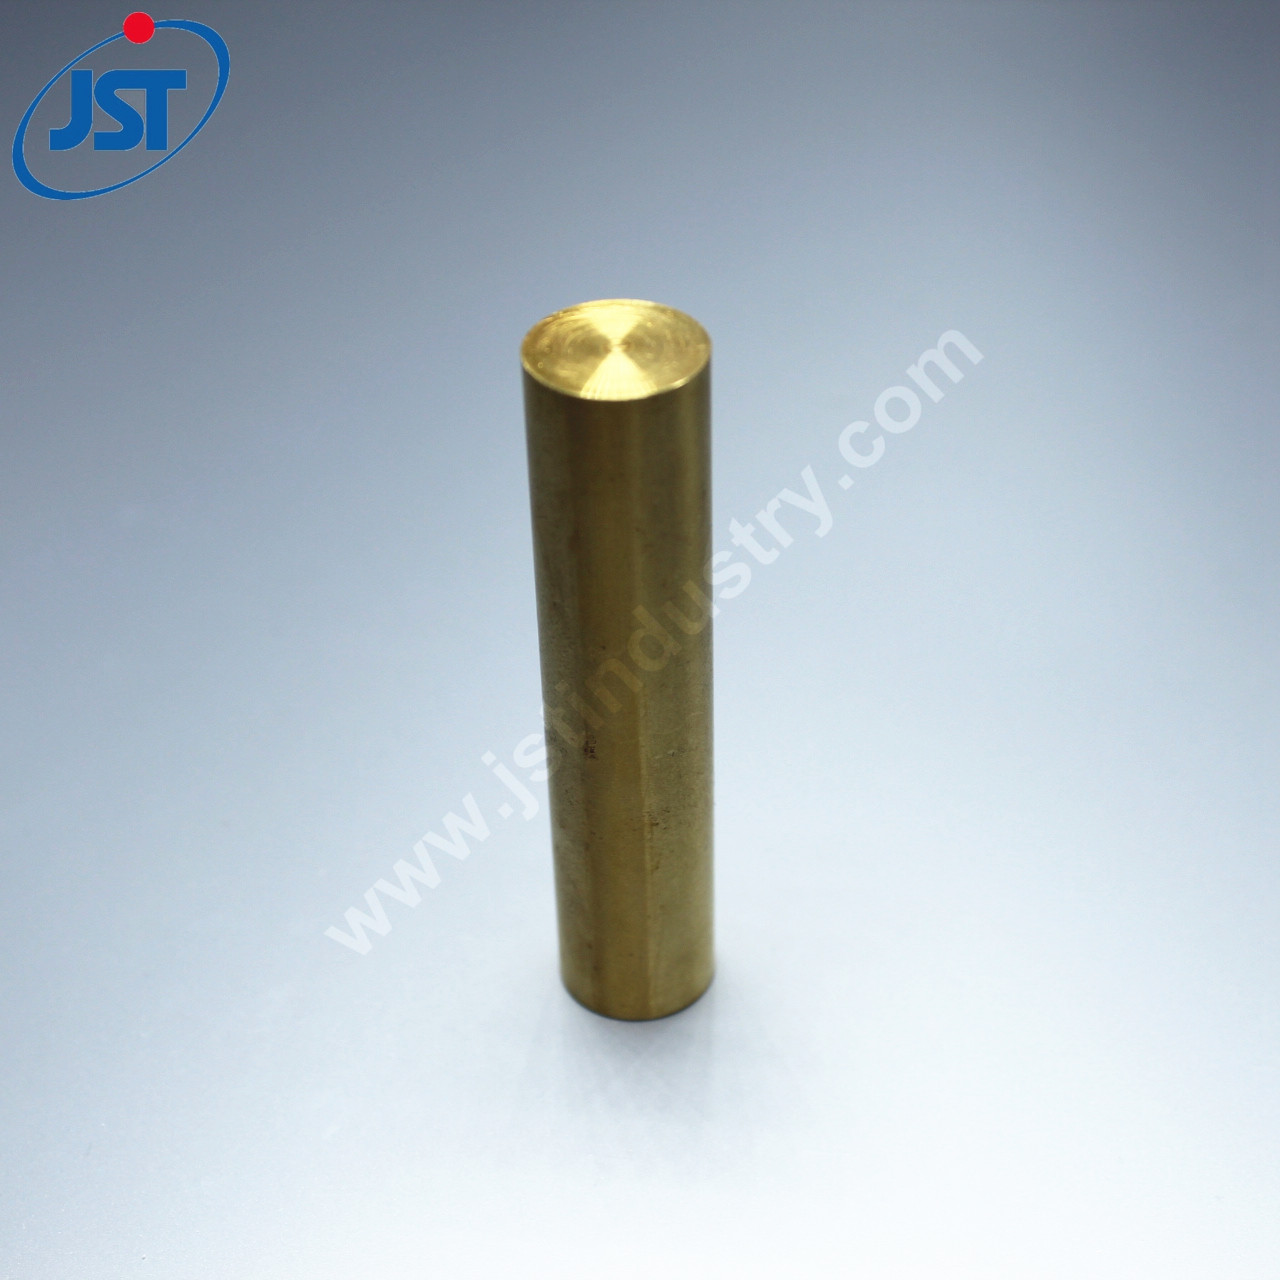 OEM Precision CNC Turning Brass Parts for Spare Hardware